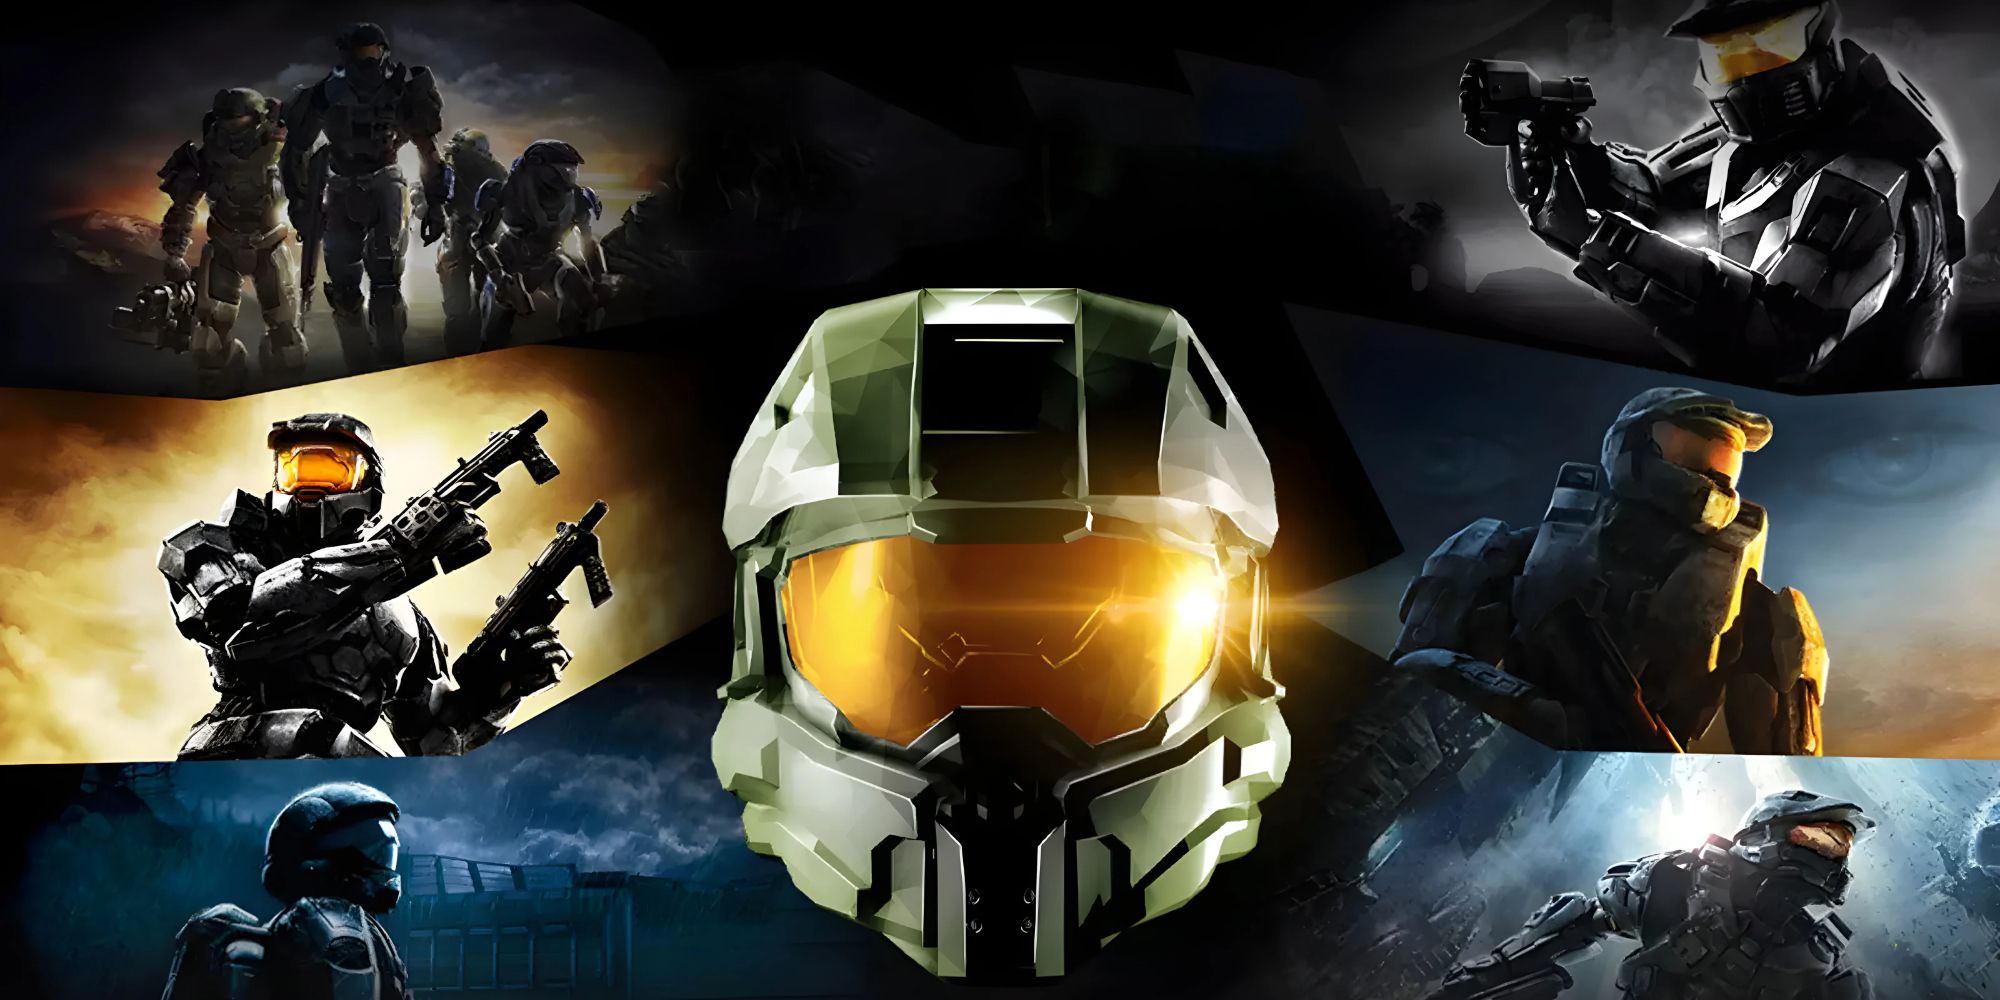 Halo the Master Chief Collection Cover Image video game cover with master chief helmet